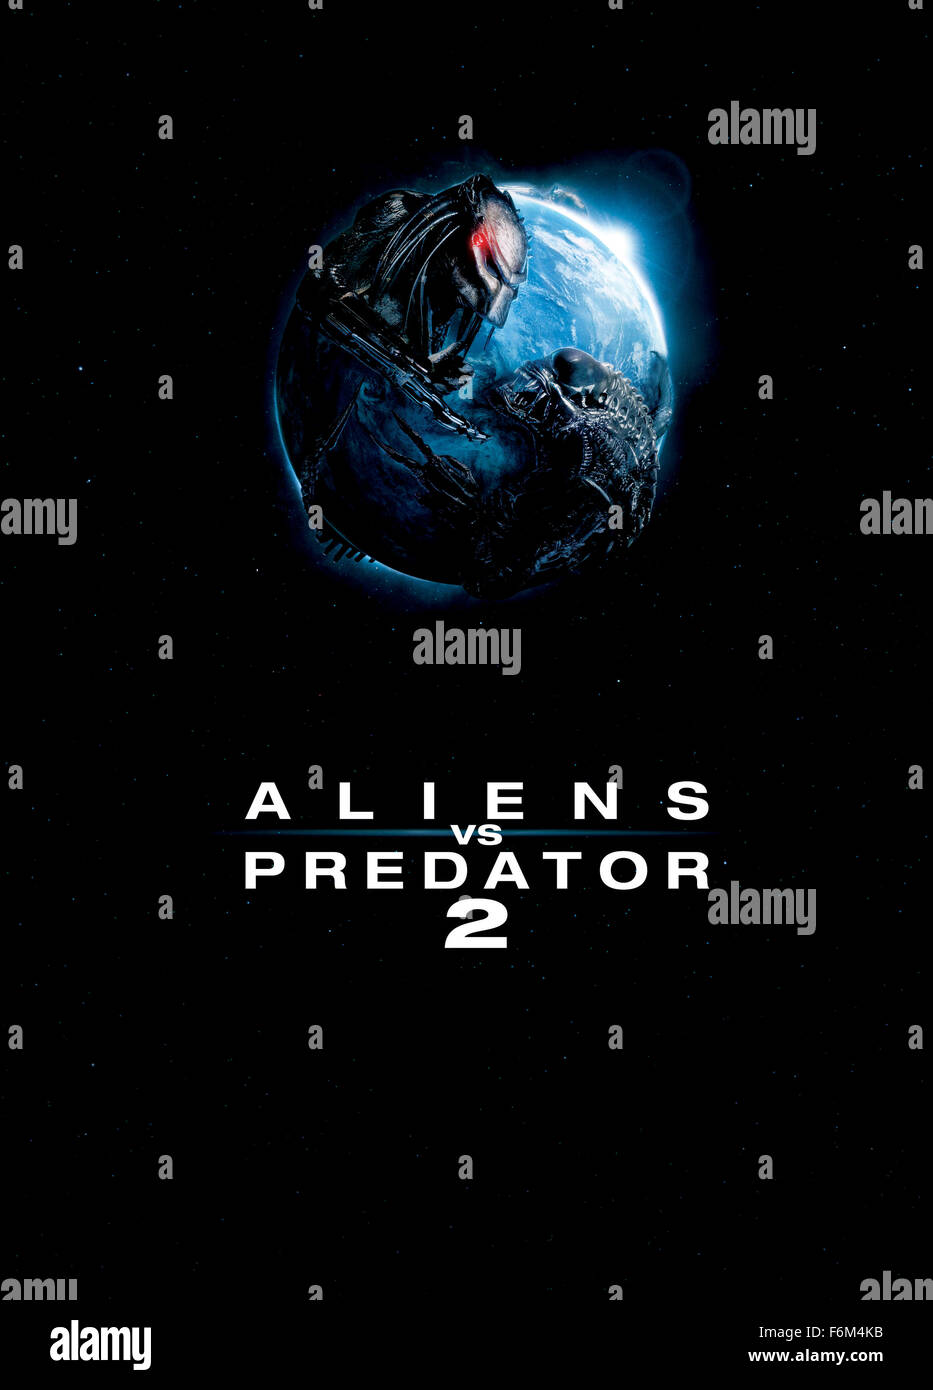 RELEASE DATE: December 14, 2007. MOVIE TITLE: Aliens vs. Predator: Requiem - STUDIO: Twentieth Century-Fox Film Corp.. PLOT: Warring alien and predator races descend on a small town, where unsuspecting residents must band together for any chance of survival. PICTURED: Poster Art. Stock Photo